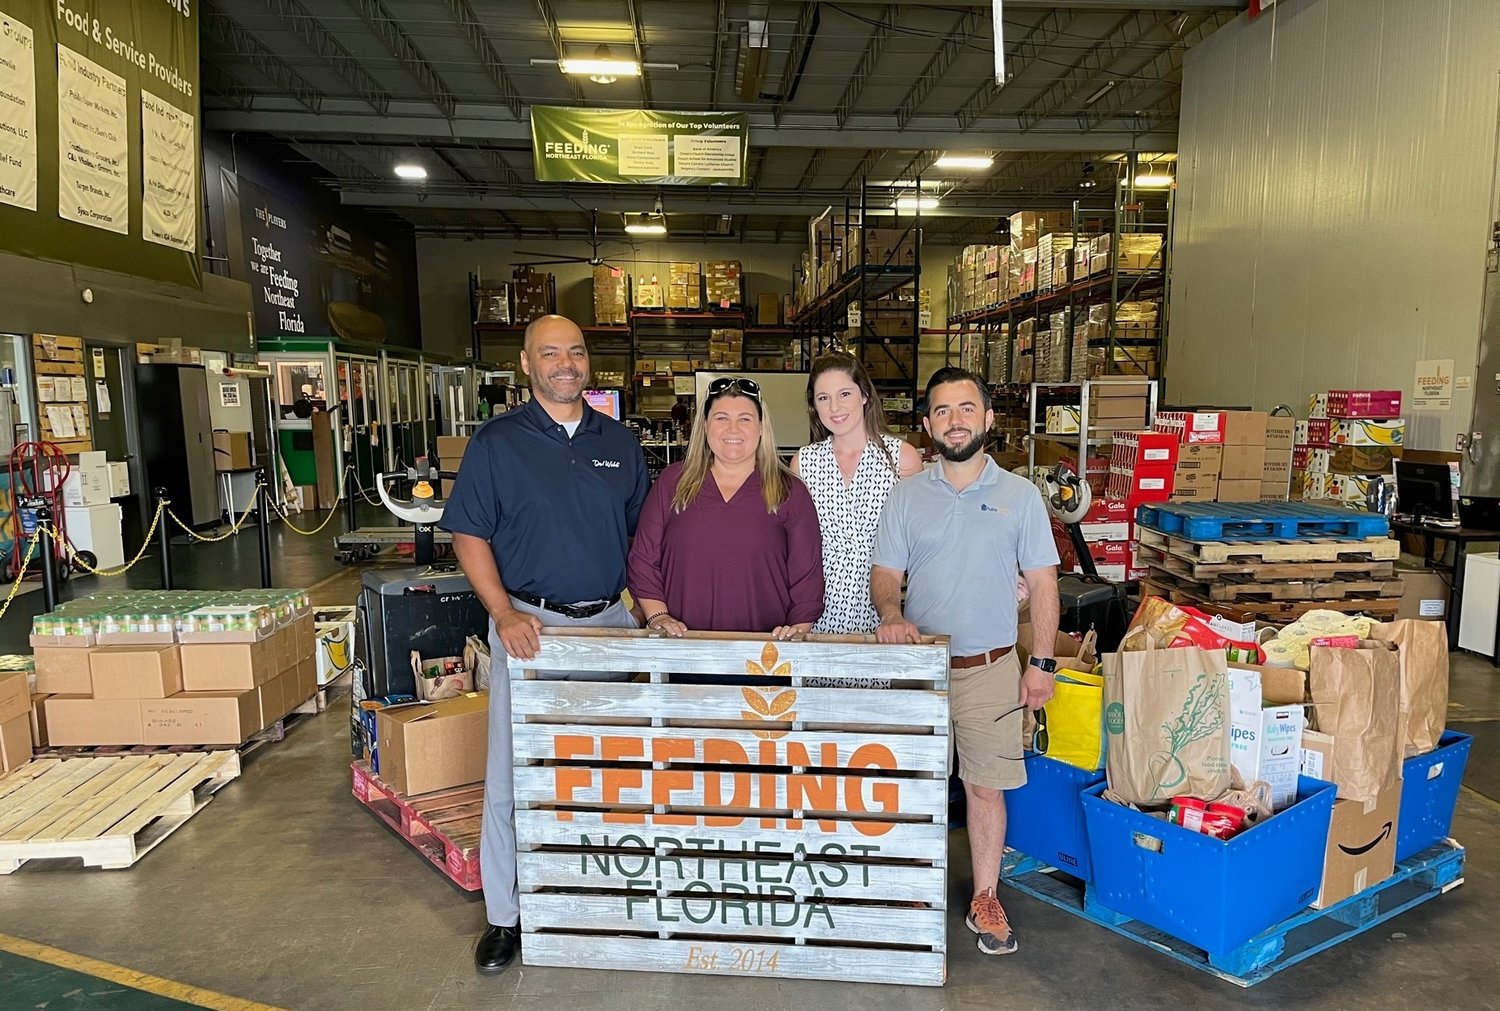 Pictured from left are Eric Pledger, Nicole Pare, Mandy Wicker and Taulant Marra prepare to donate 960 pounds of food to those in need.